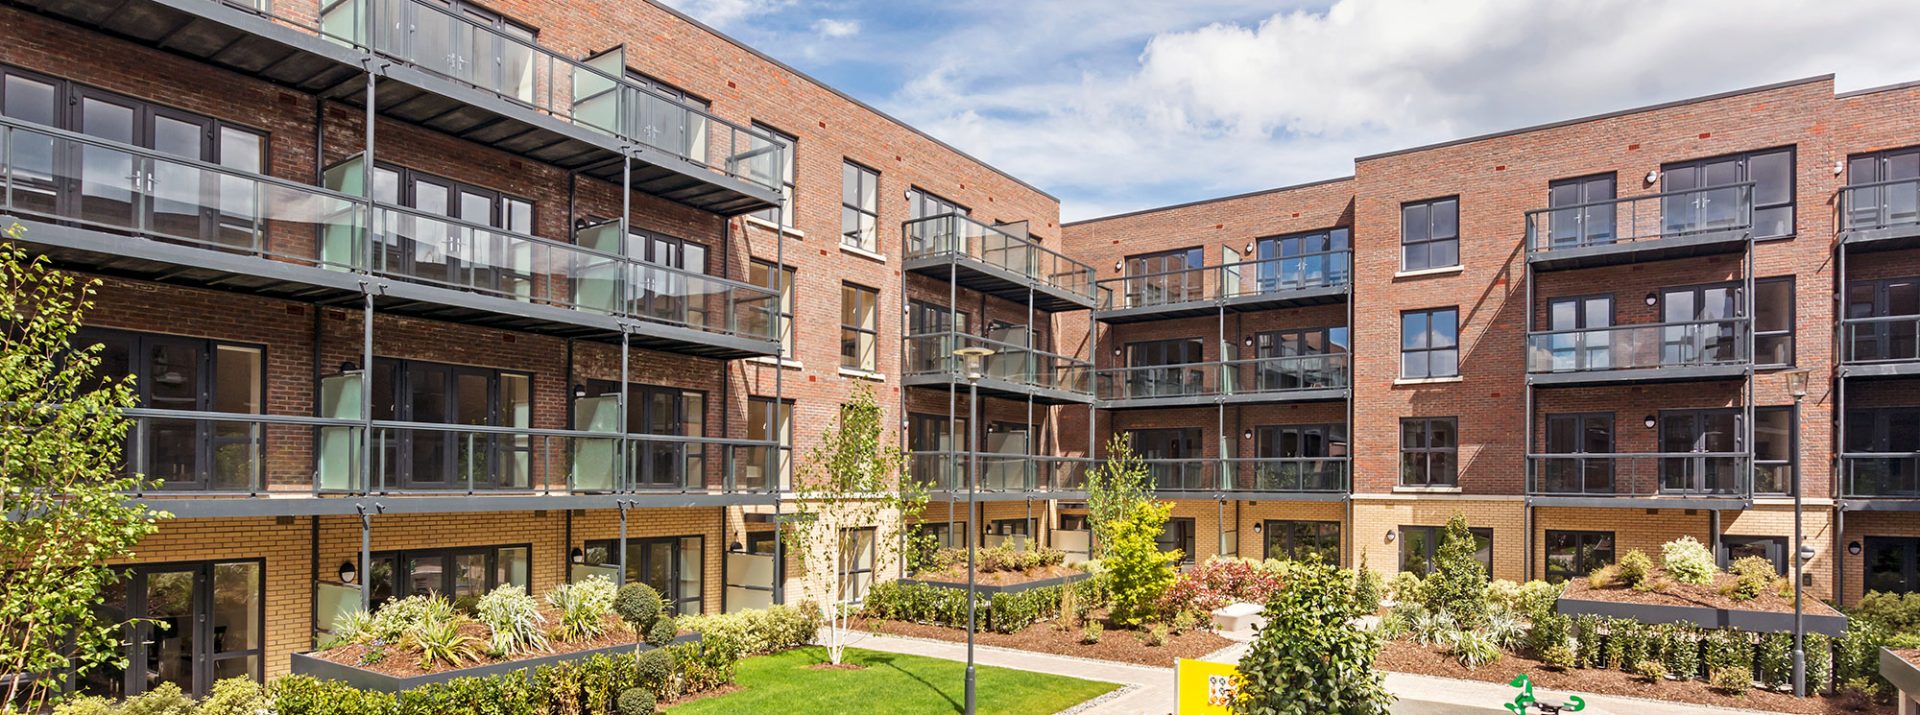 Occu Abbot exterior showing courtyard and green space